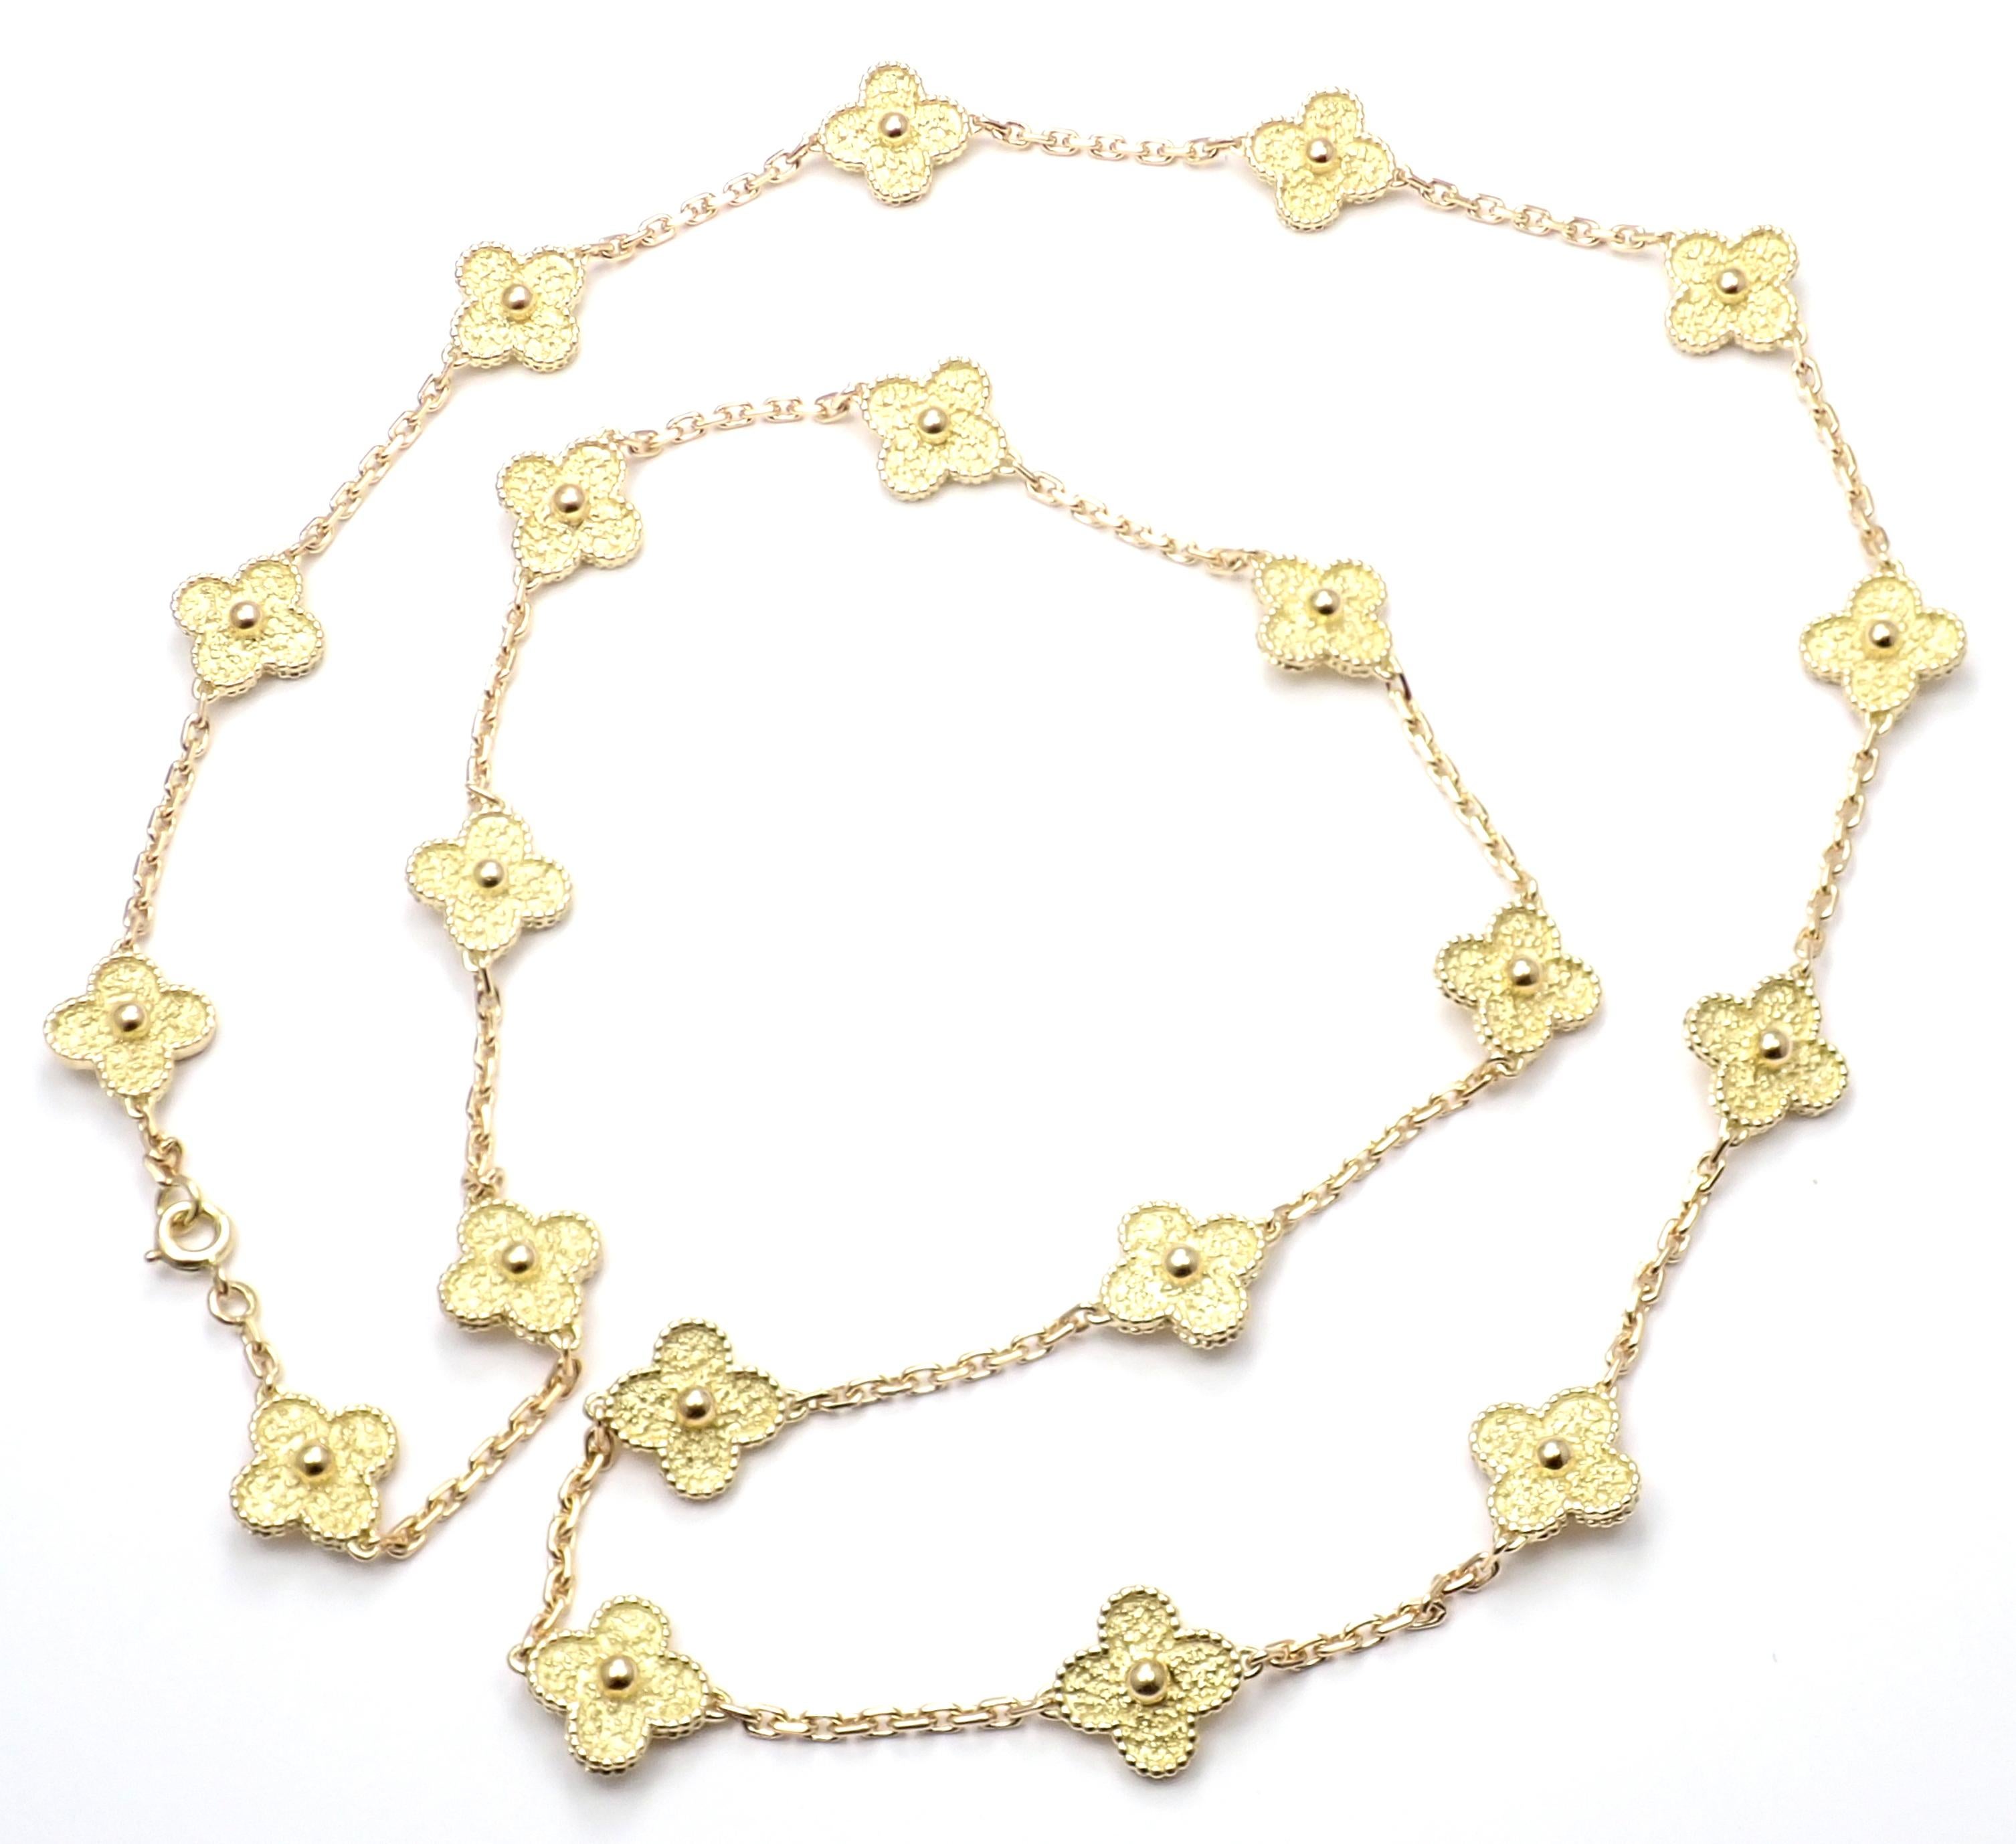 18k Yellow Gold Alhambra 20 Motif Necklace by Van Cleef & Arpels. 
With 20 motifs of 18k yellow gold Alhambras 15mm each.
This necklace comes with service paper from Van Cleef & Arpels store in Japan.
Details: 
Length: 31.5